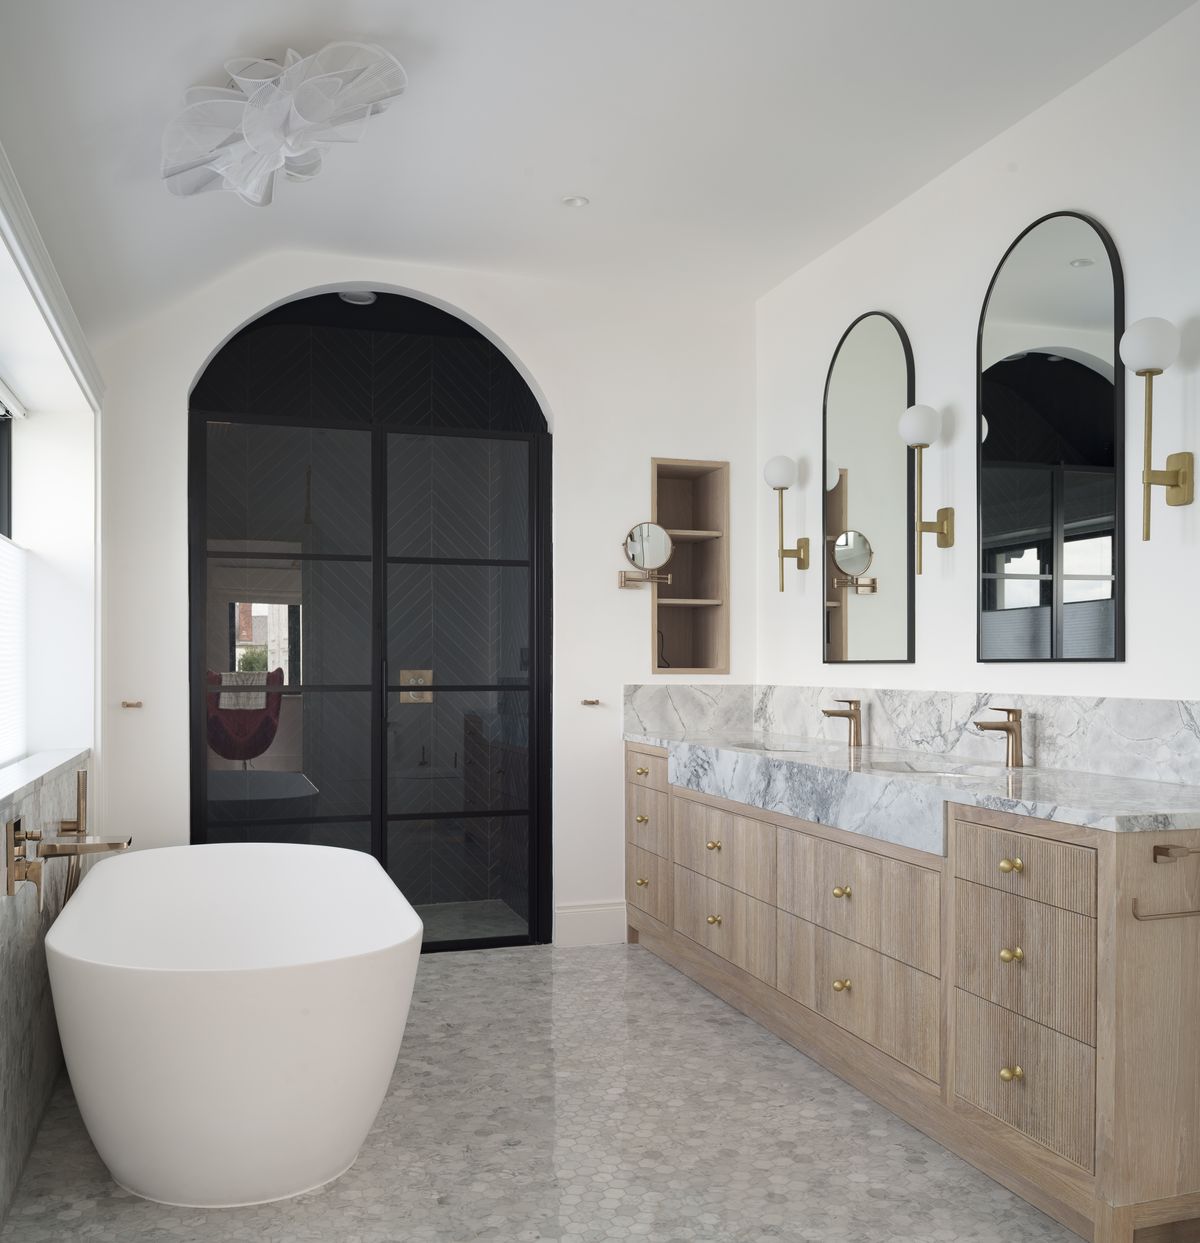 Bathroom Remodel Ideas to Make a Space Look More Expensive